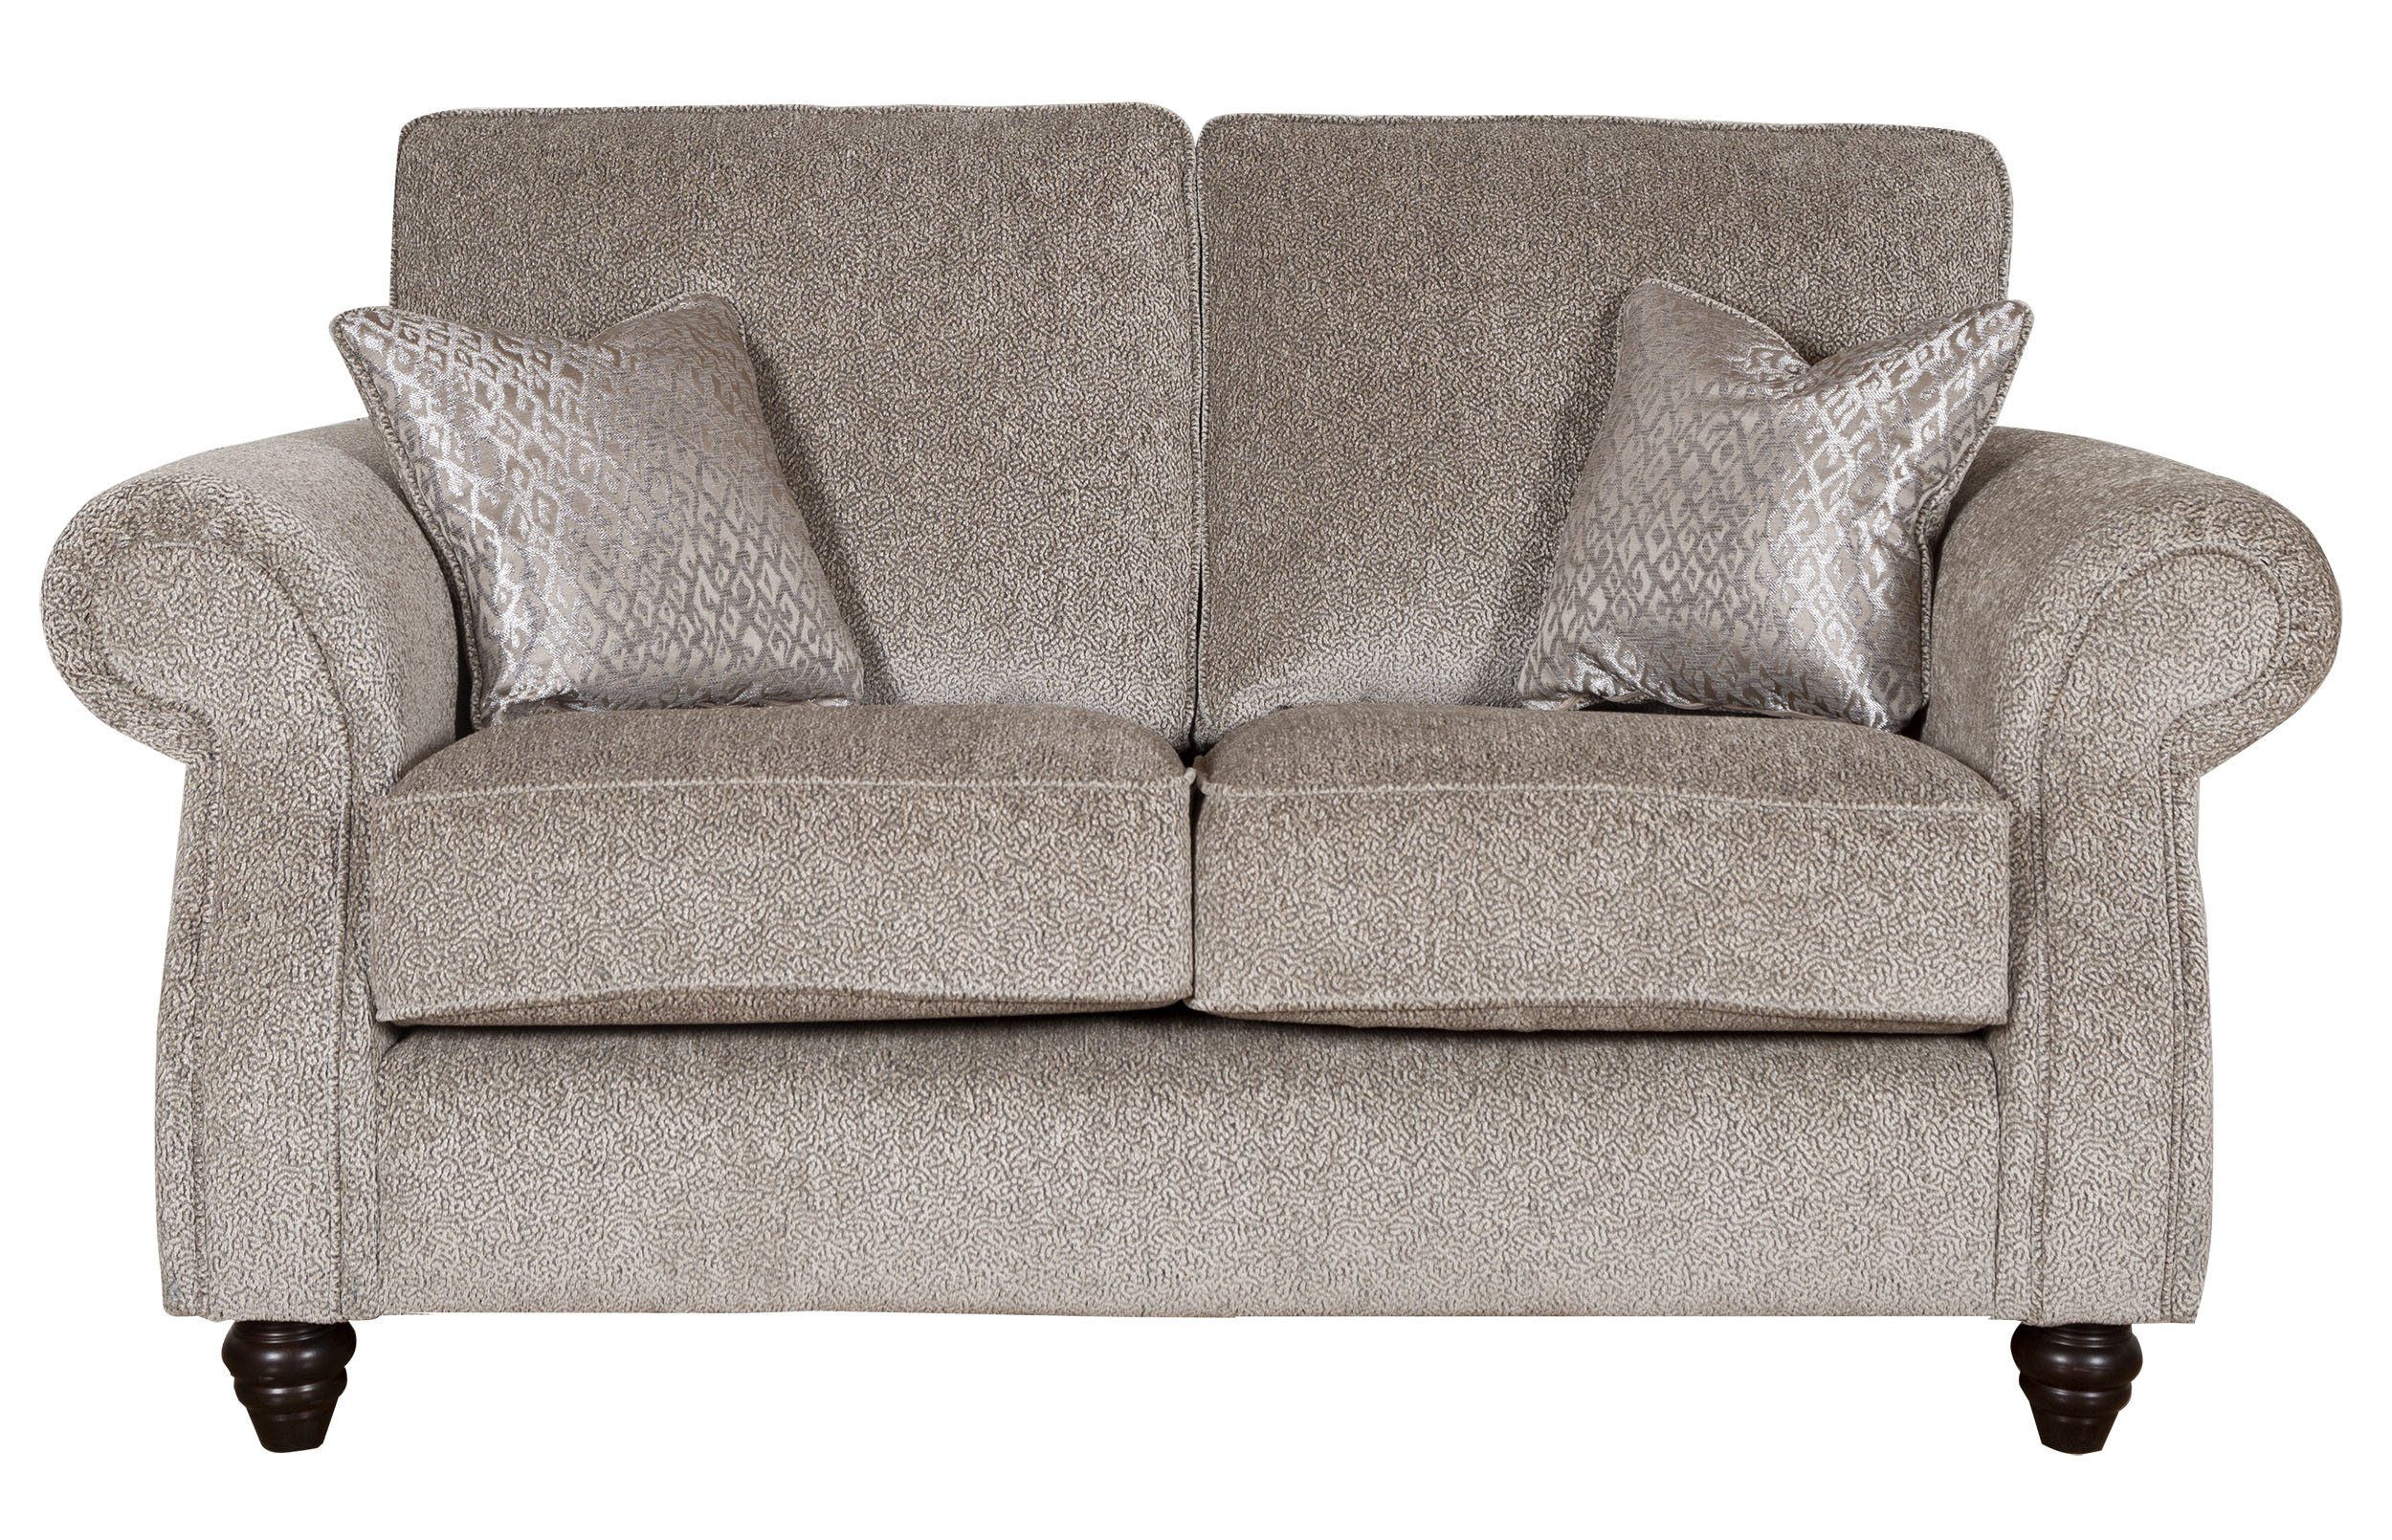 Finley special - 2 seater - front - Romance Diamond Silver.jpg